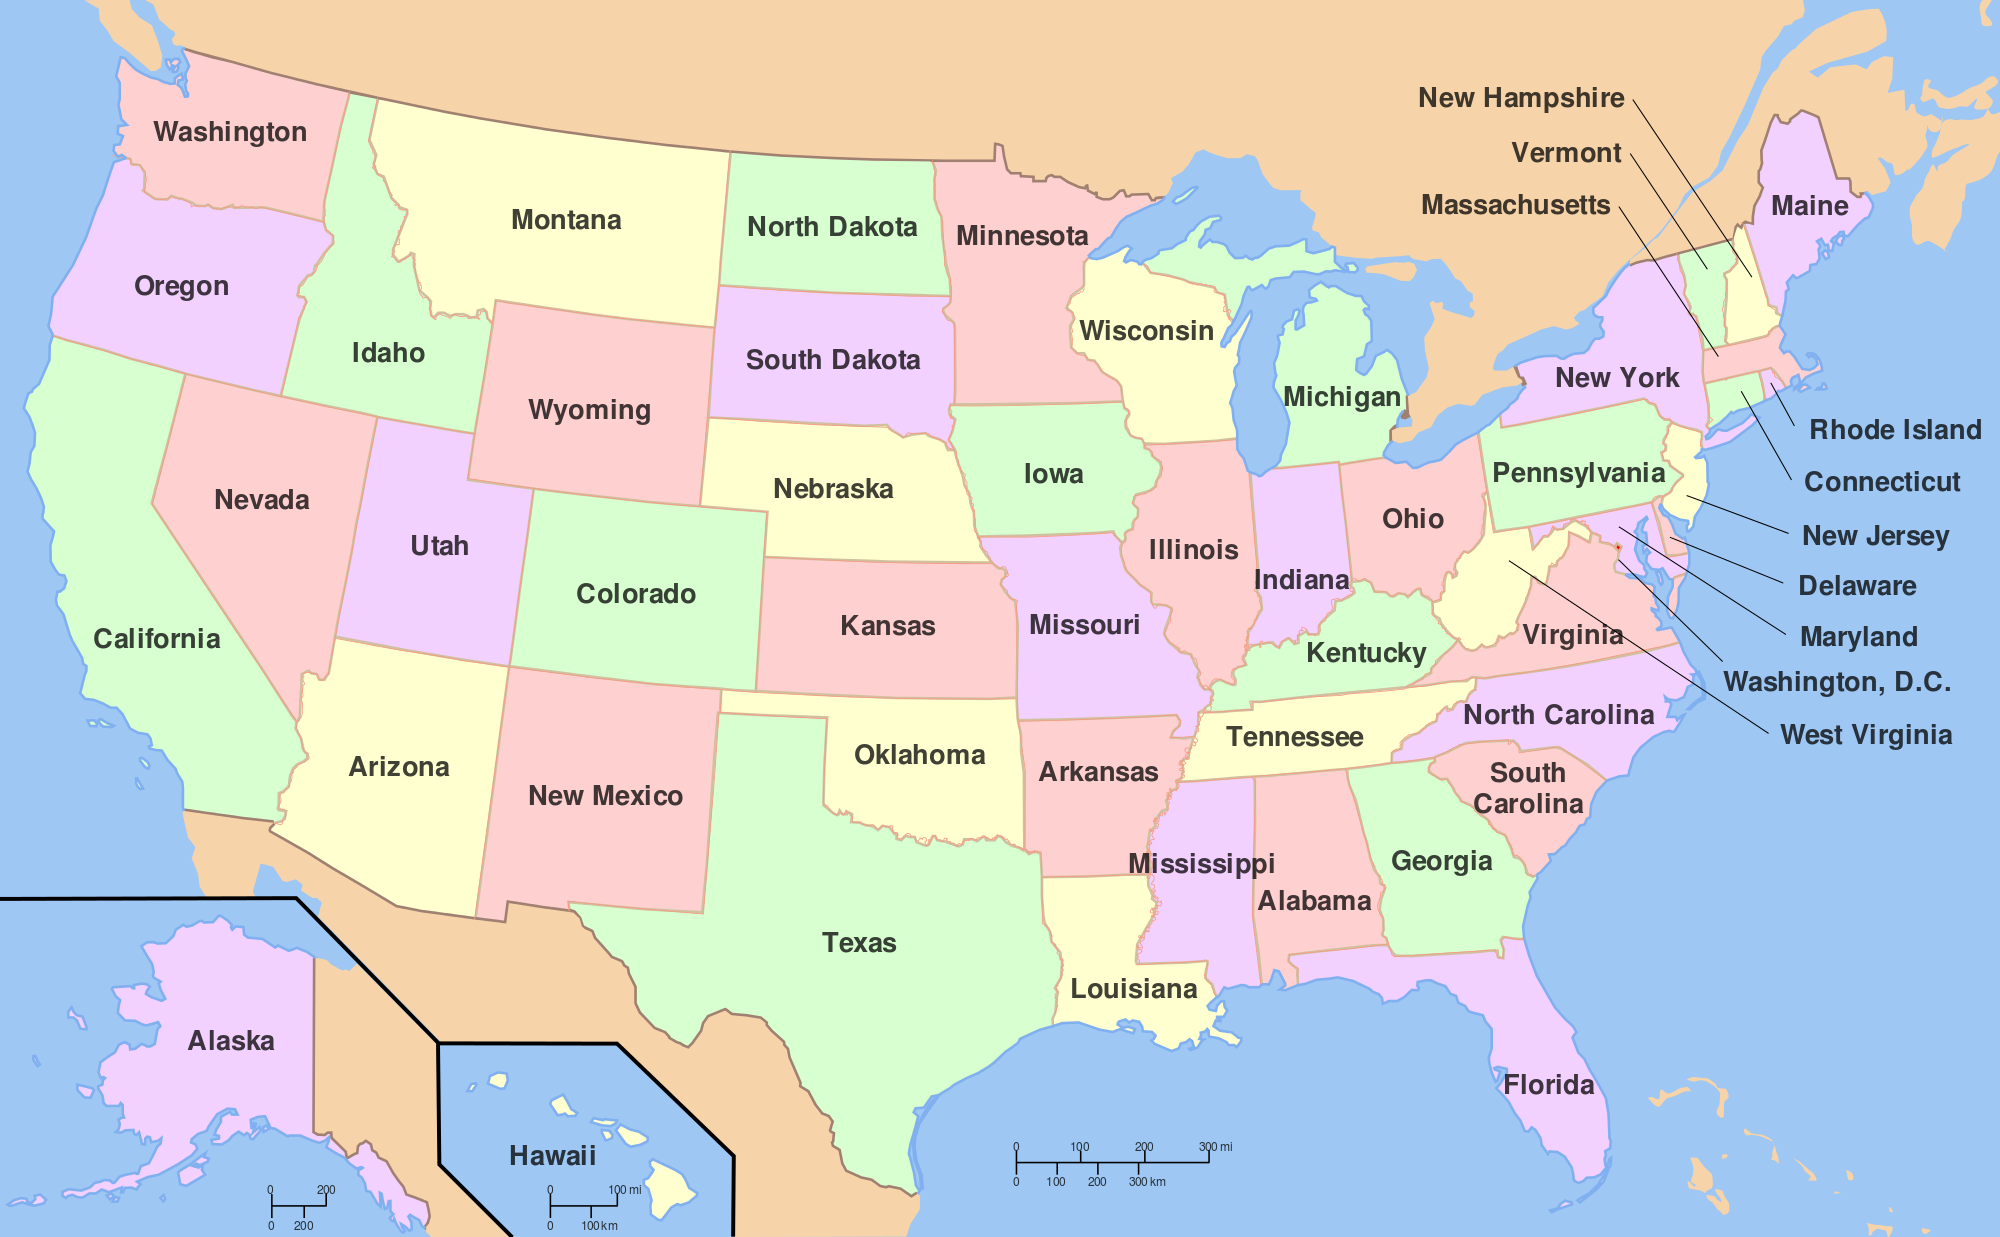 Map_of_USA_with_state_names.svg[1]